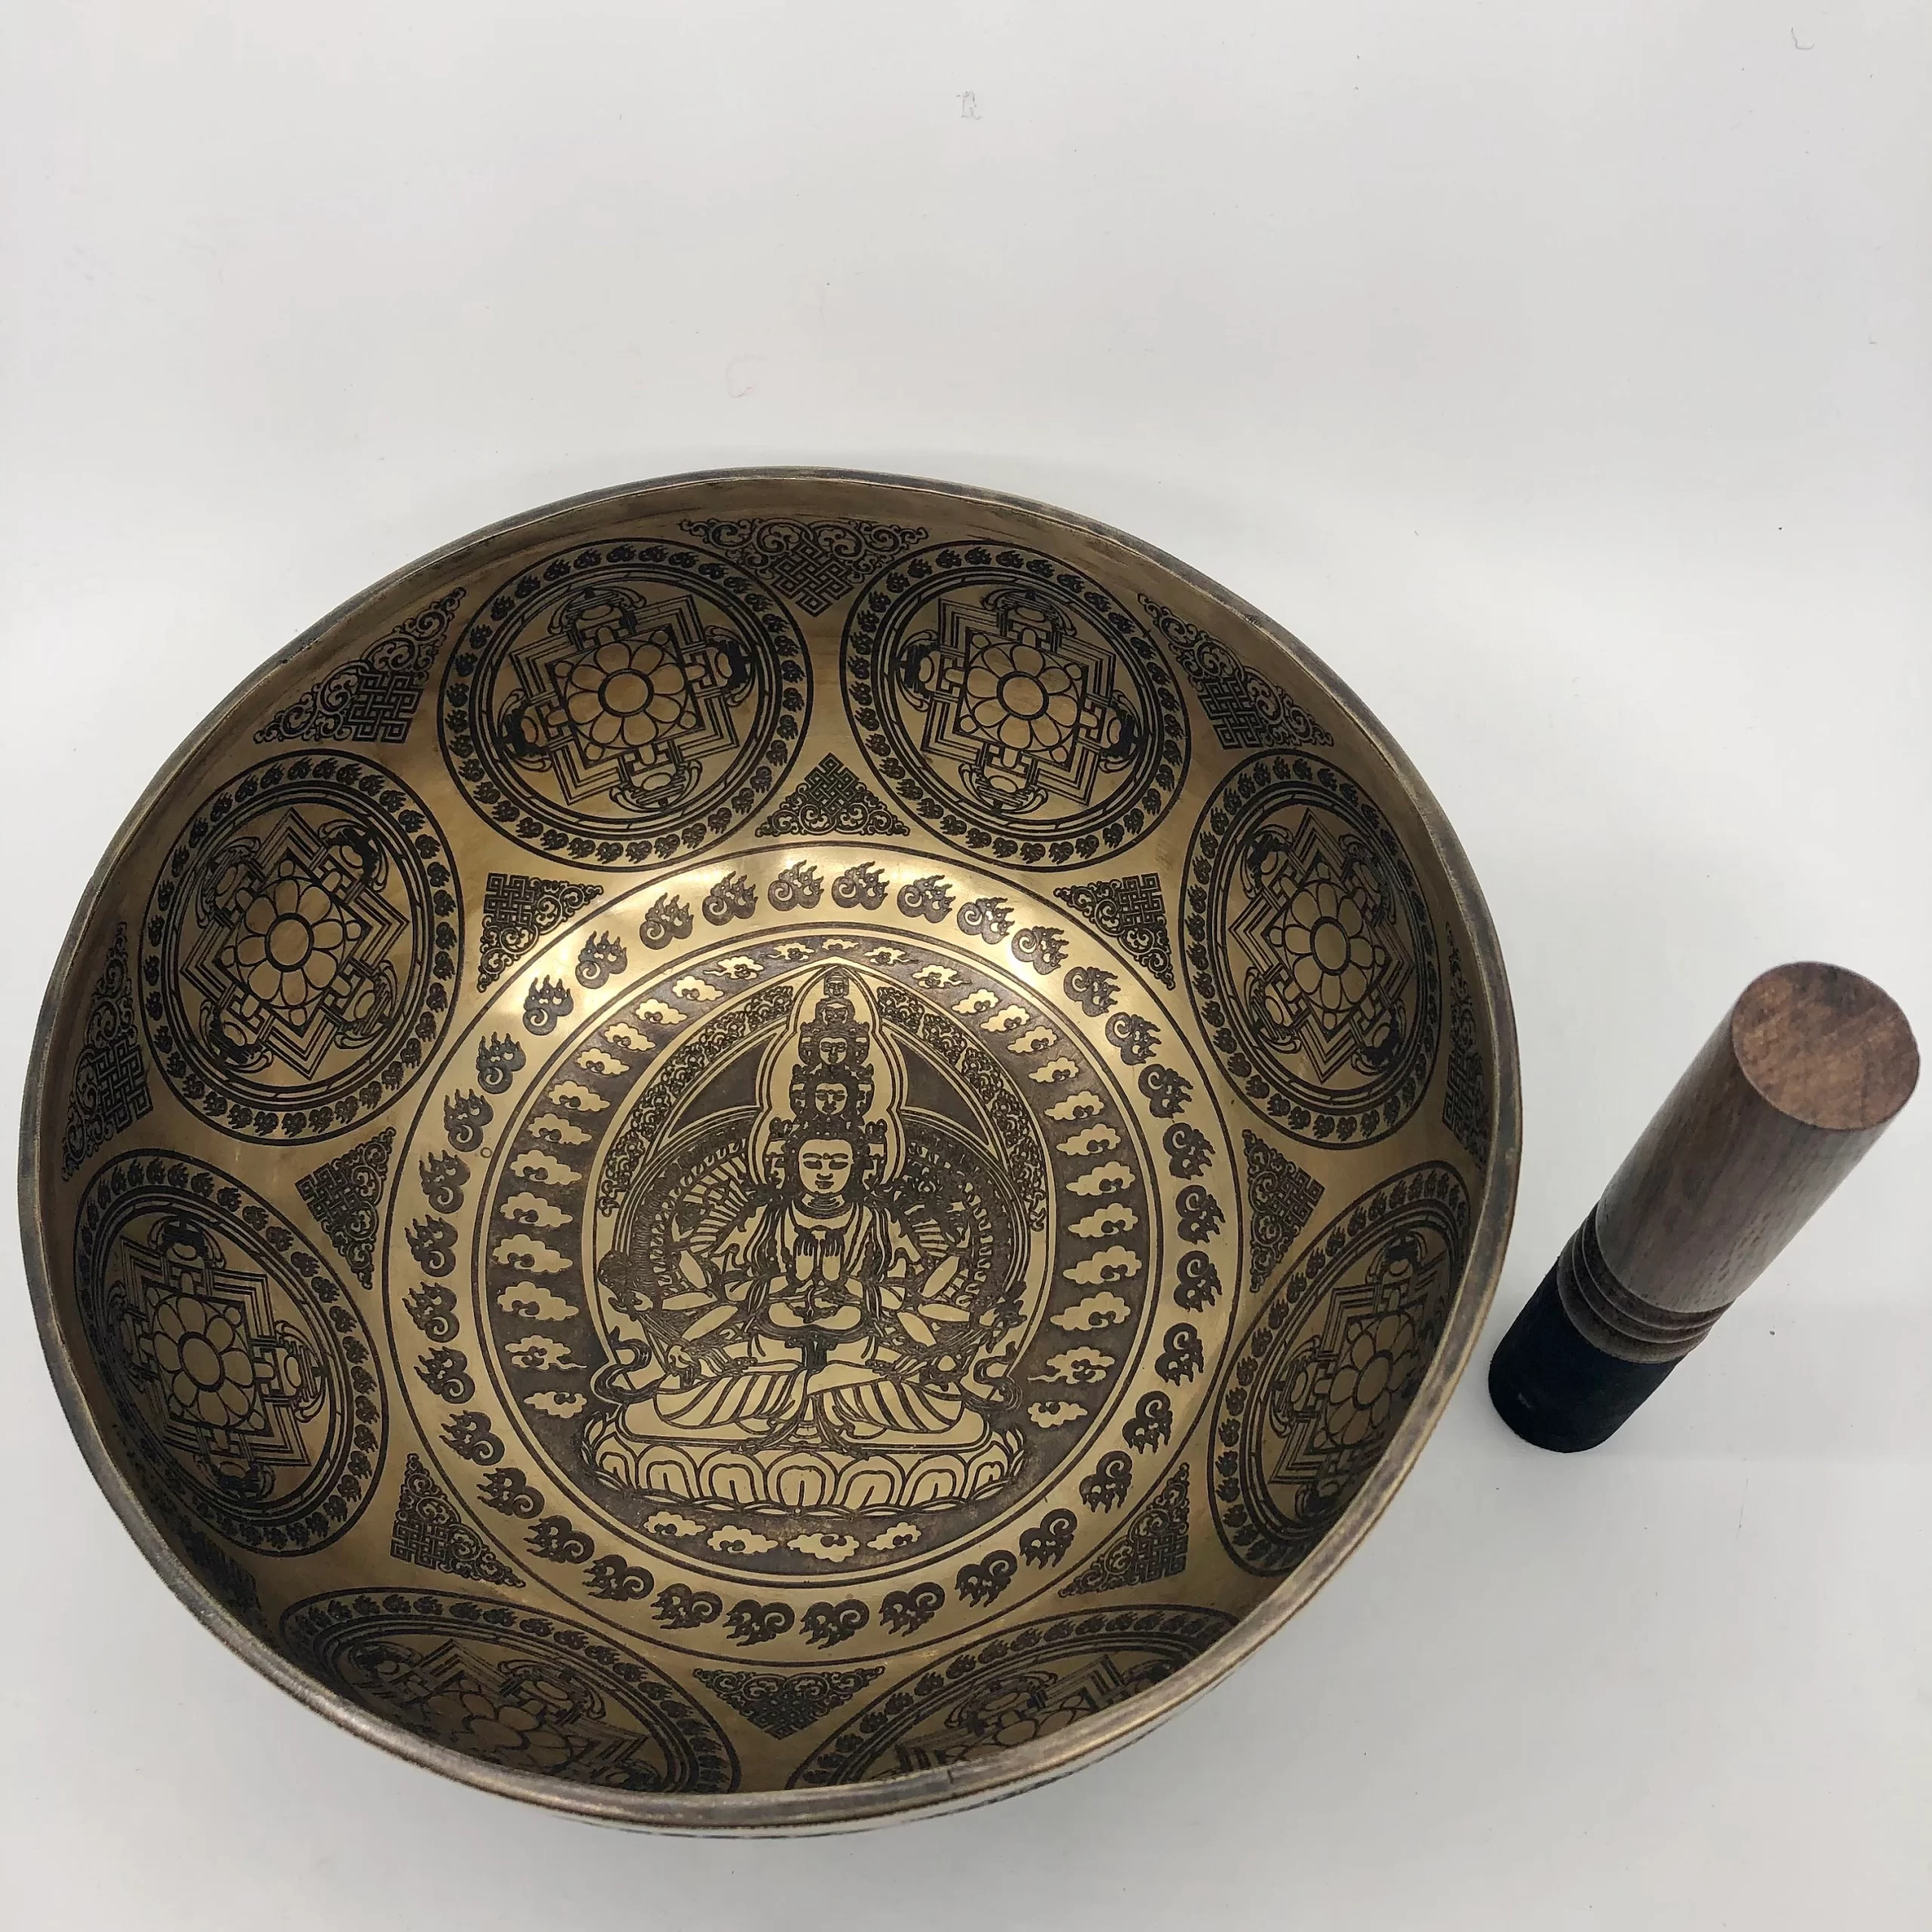 Diameter: 23 cm Weight: 1.3 kg [excluding cushion and a mallet] The package will include a Singing bowl, Cushion and a mallet Made in Nepal Handmade, Hand carved